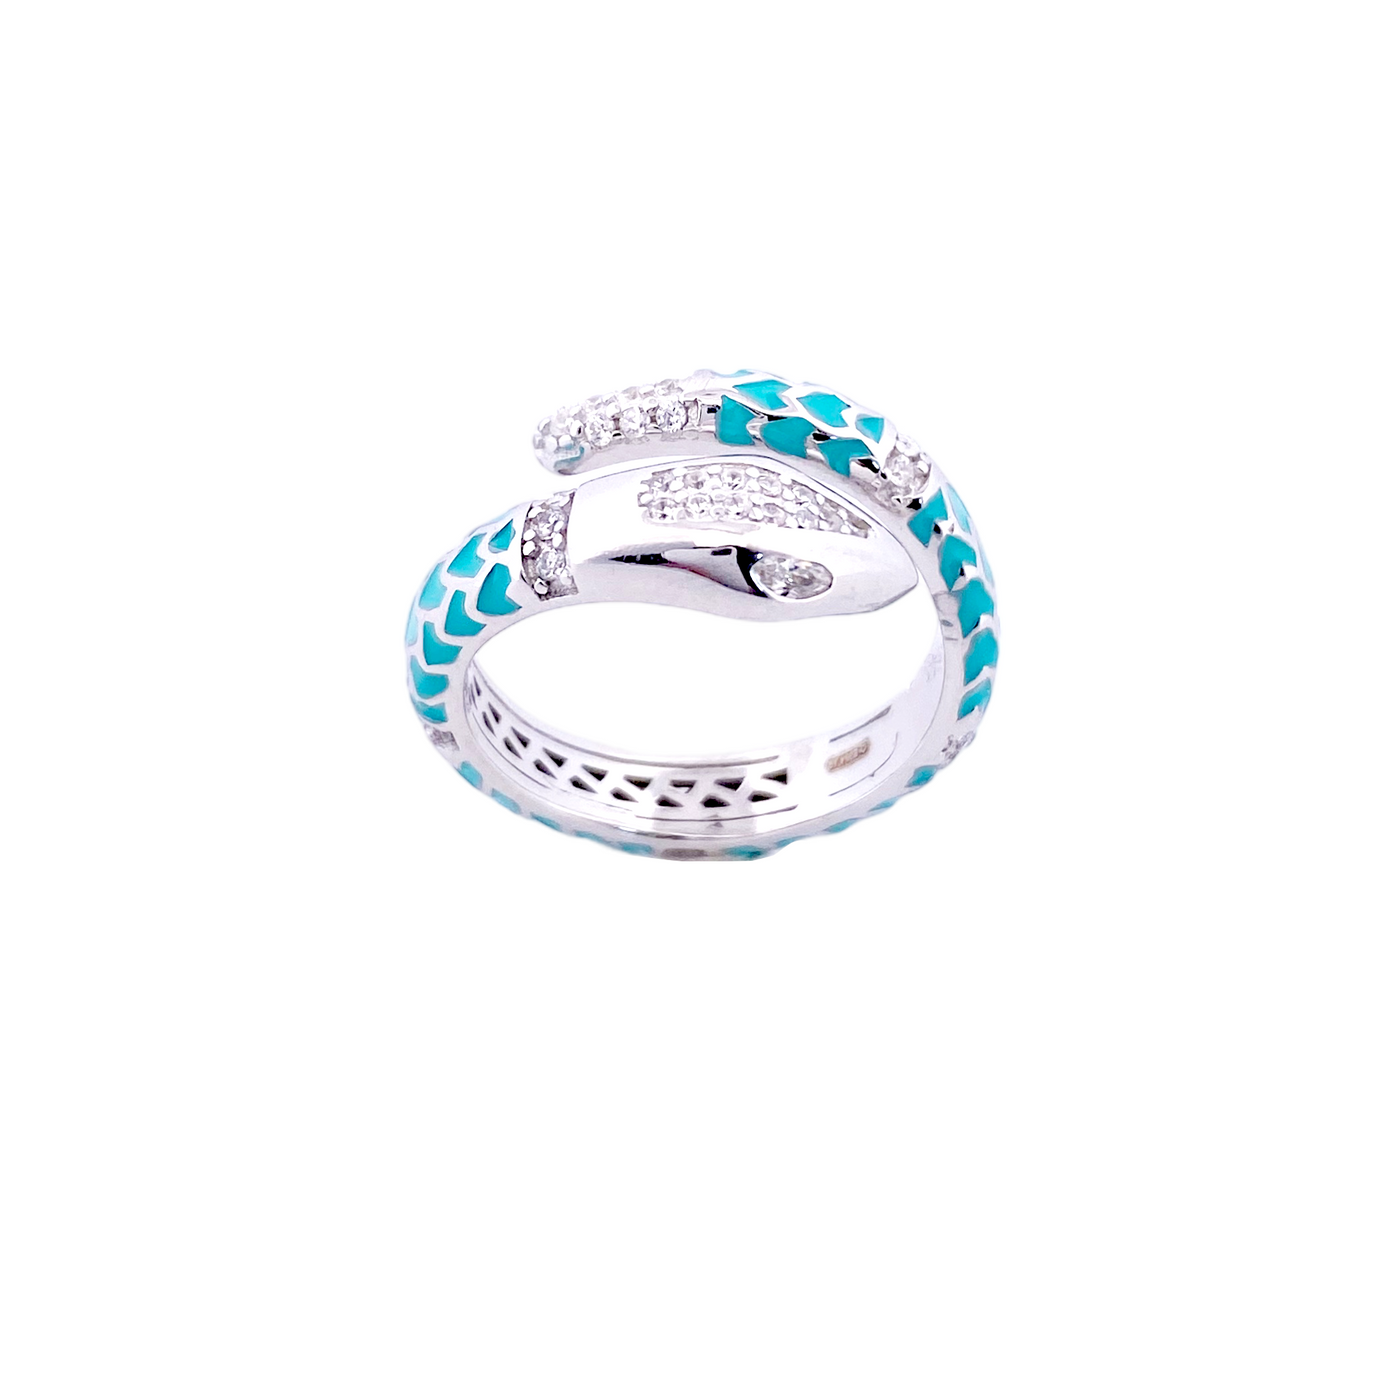 SILVER SNAKE RING WITH CZ